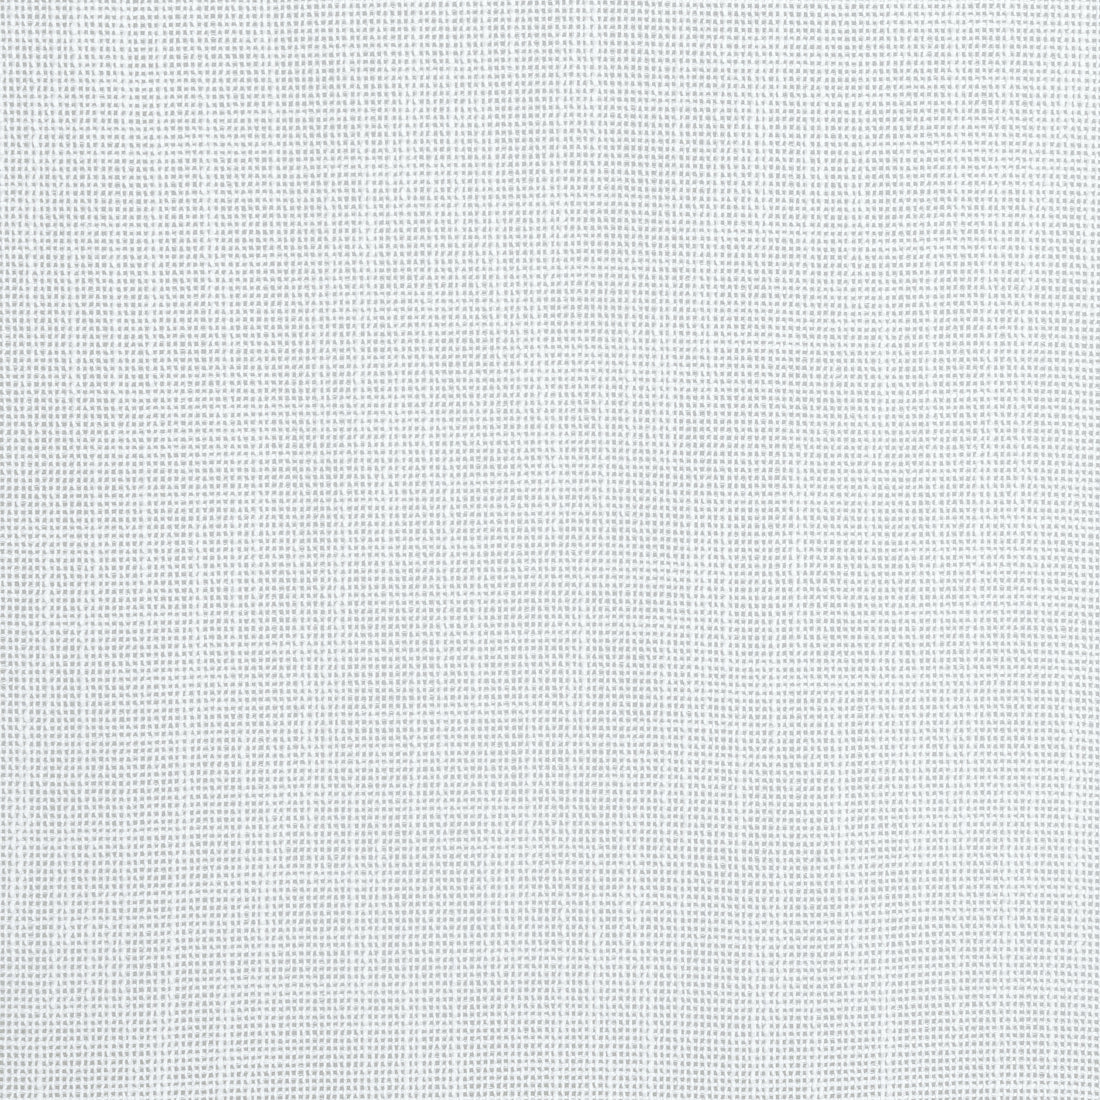 Mistral fabric in fog color - pattern number FWW8230 - by Thibaut in the Aura collection